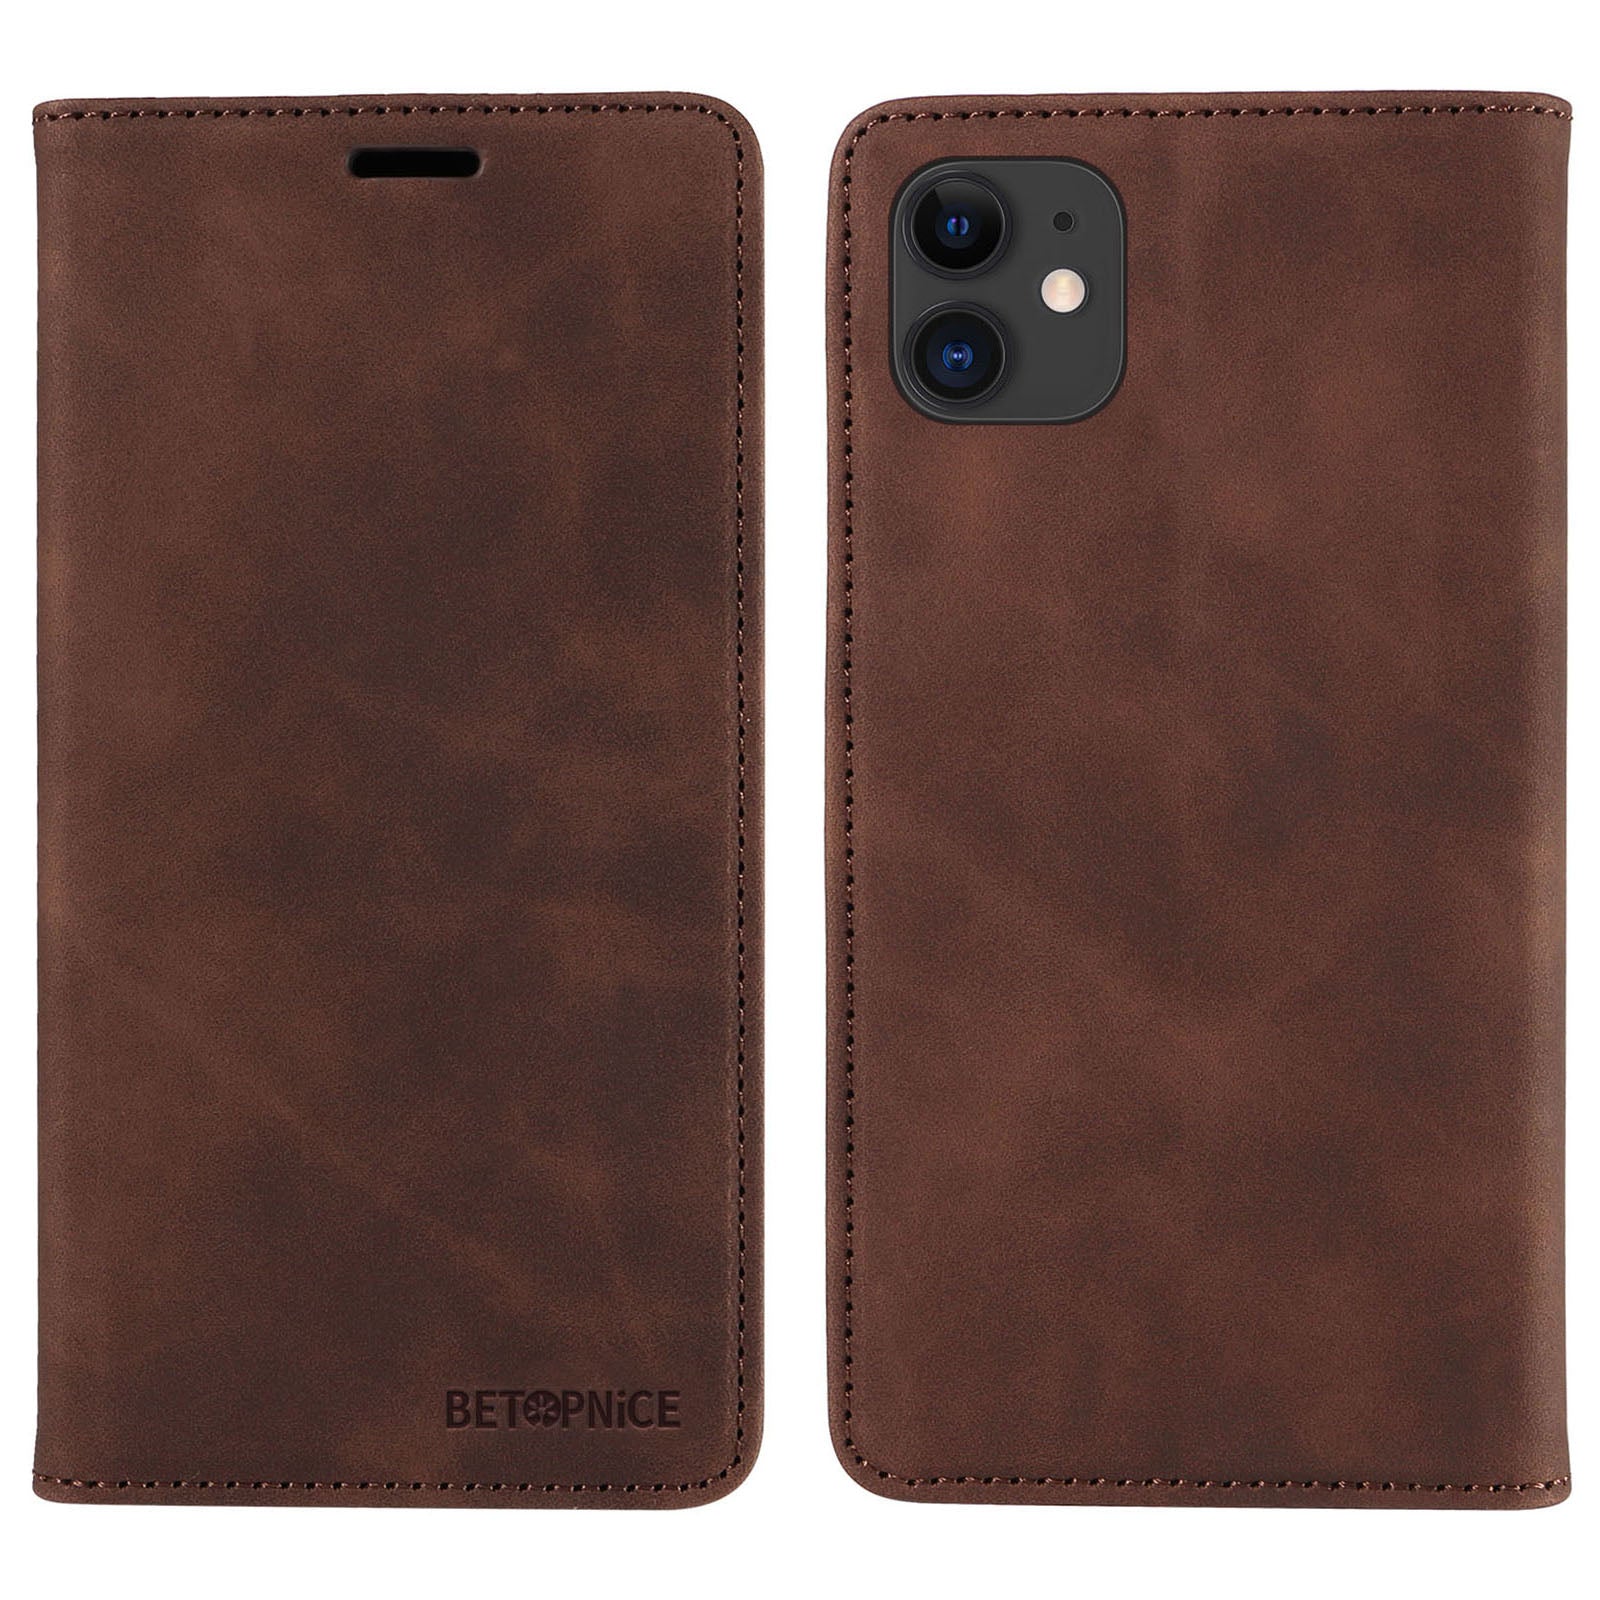 Uniqkart 003 For iPhone 12 / 12 Pro 6.1 inch Cell Phone Cover Wallet Leather Stand RFID Blocking Case - Brown